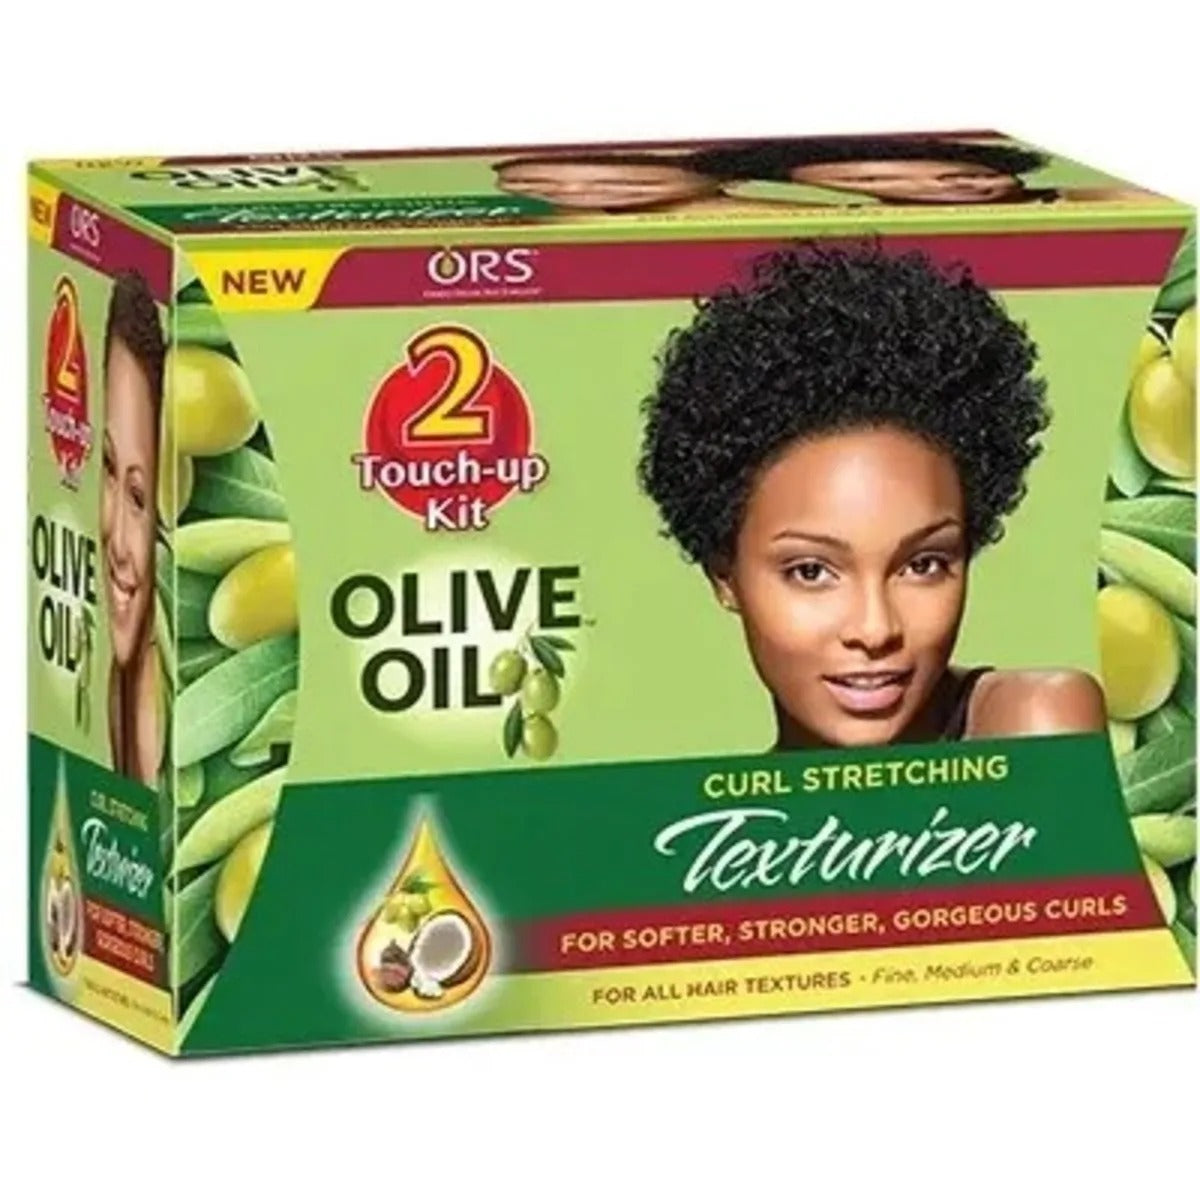 ORS Olive Oil Hair Texturizer -Natural Hair Curl Stretching For All Hair Textures